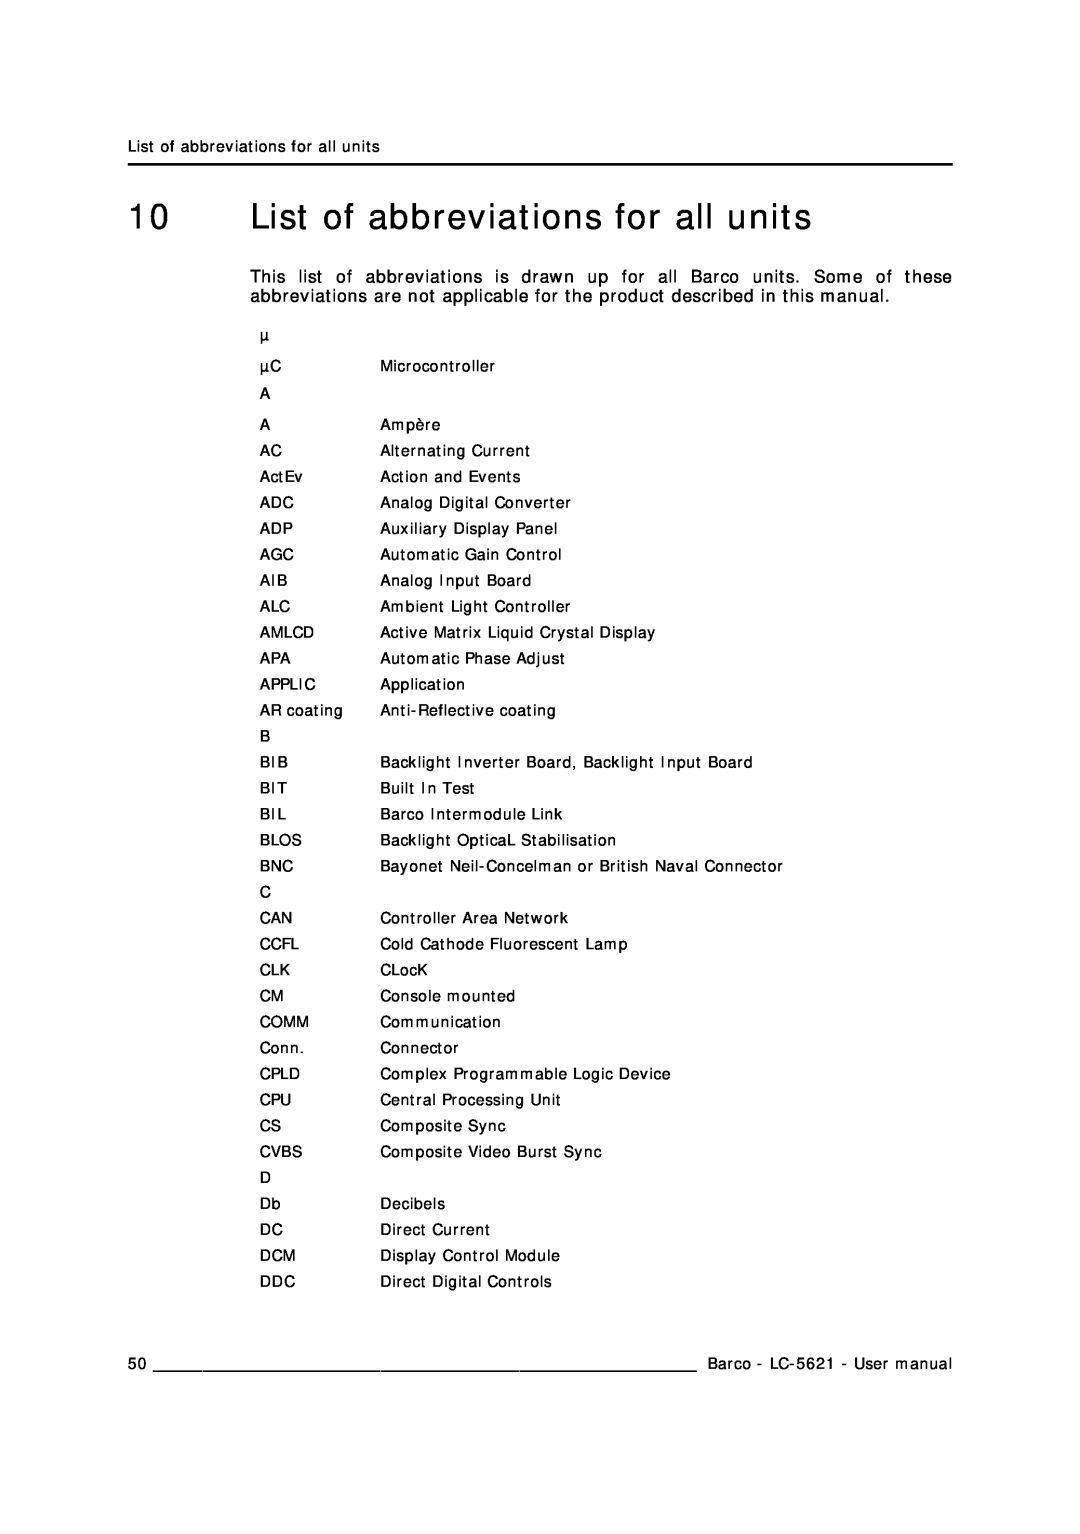 Barco LC-5621 user manual List of abbreviations for all units 